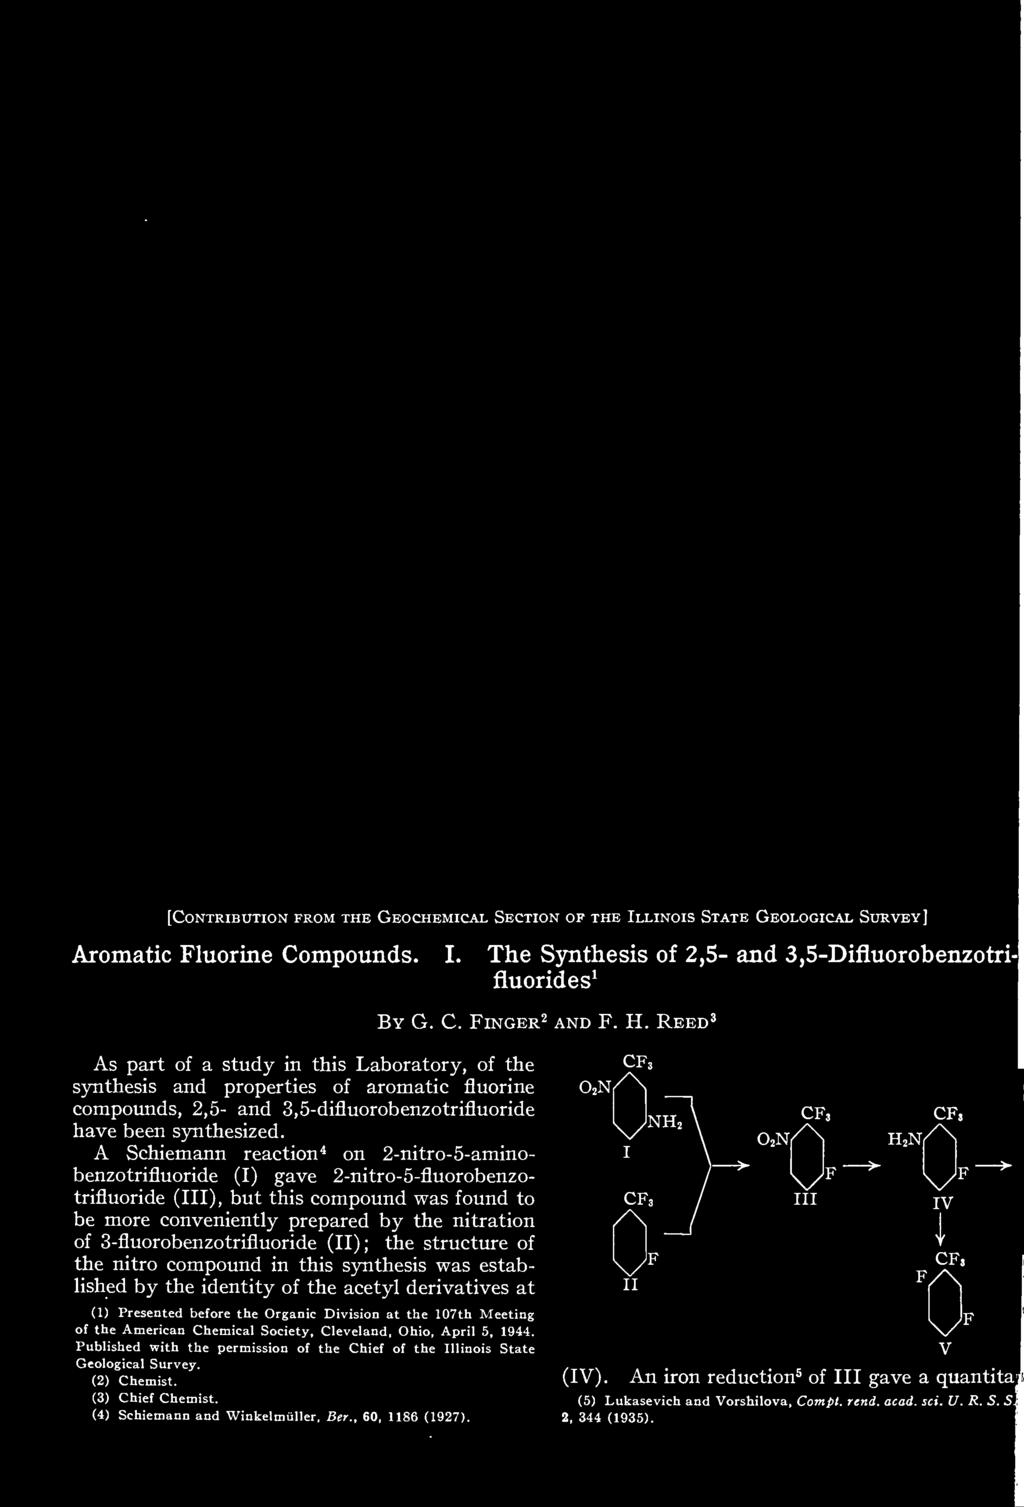 the 107th Meeting I of the American Chemical Society, Cleveland, Ohio, April 5, 1944. Published with the permission of the Chief of the Illinois State \/ V Geological Survey. (2) chemist. (IV).